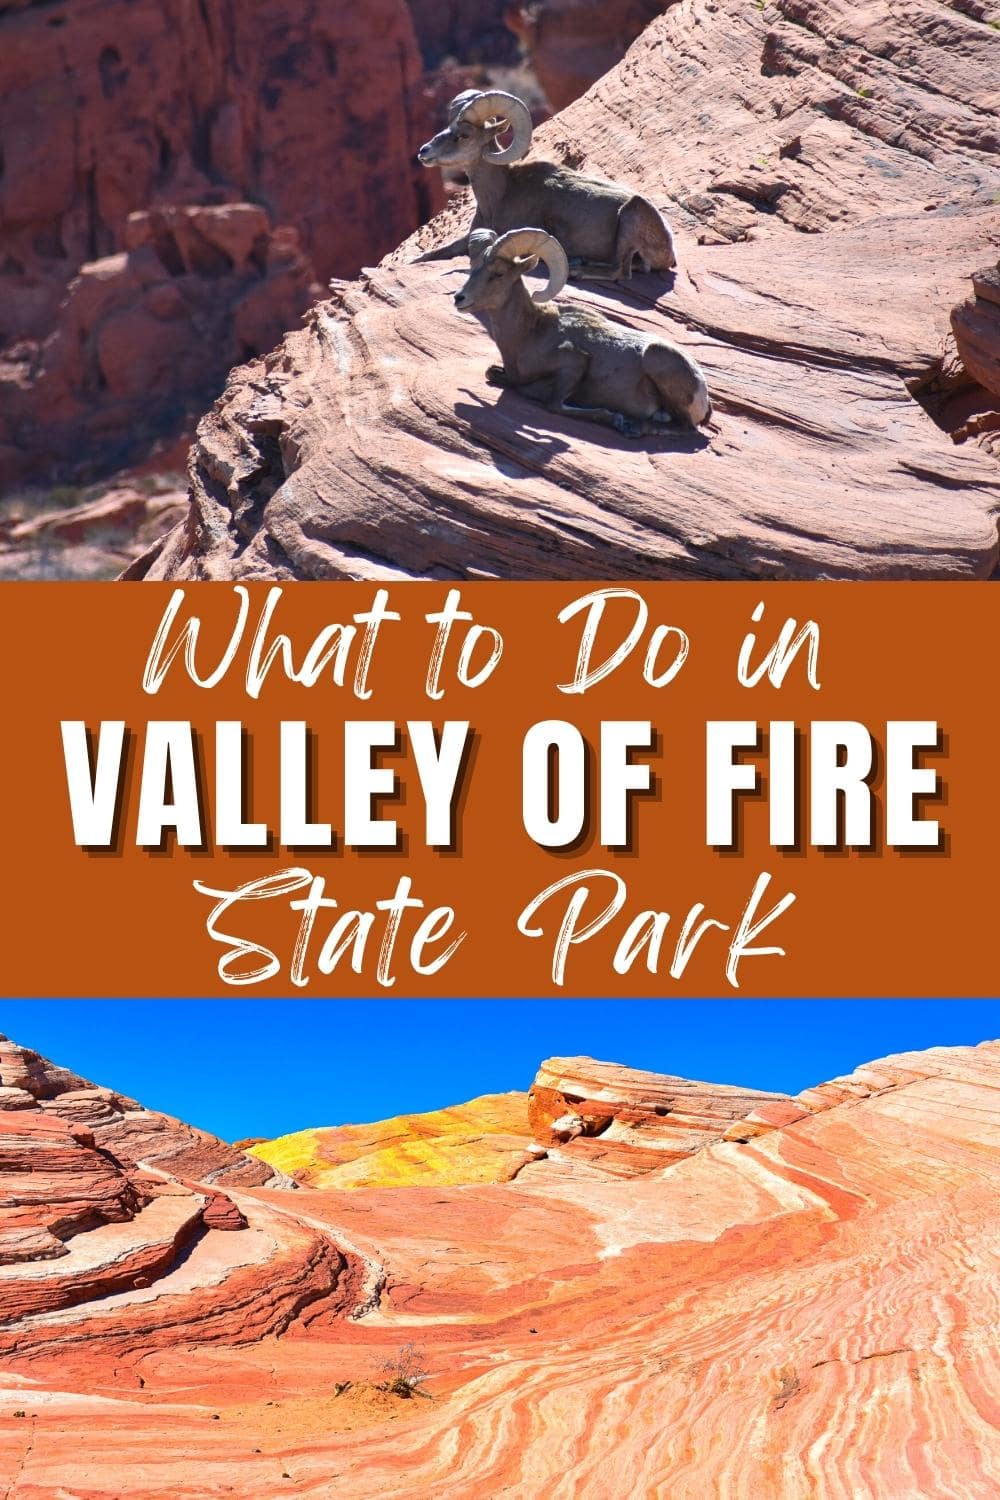 Top 5 Amazing Things to Do in Valley of Fire State Park: Easy Day Trip from Las Vegas!